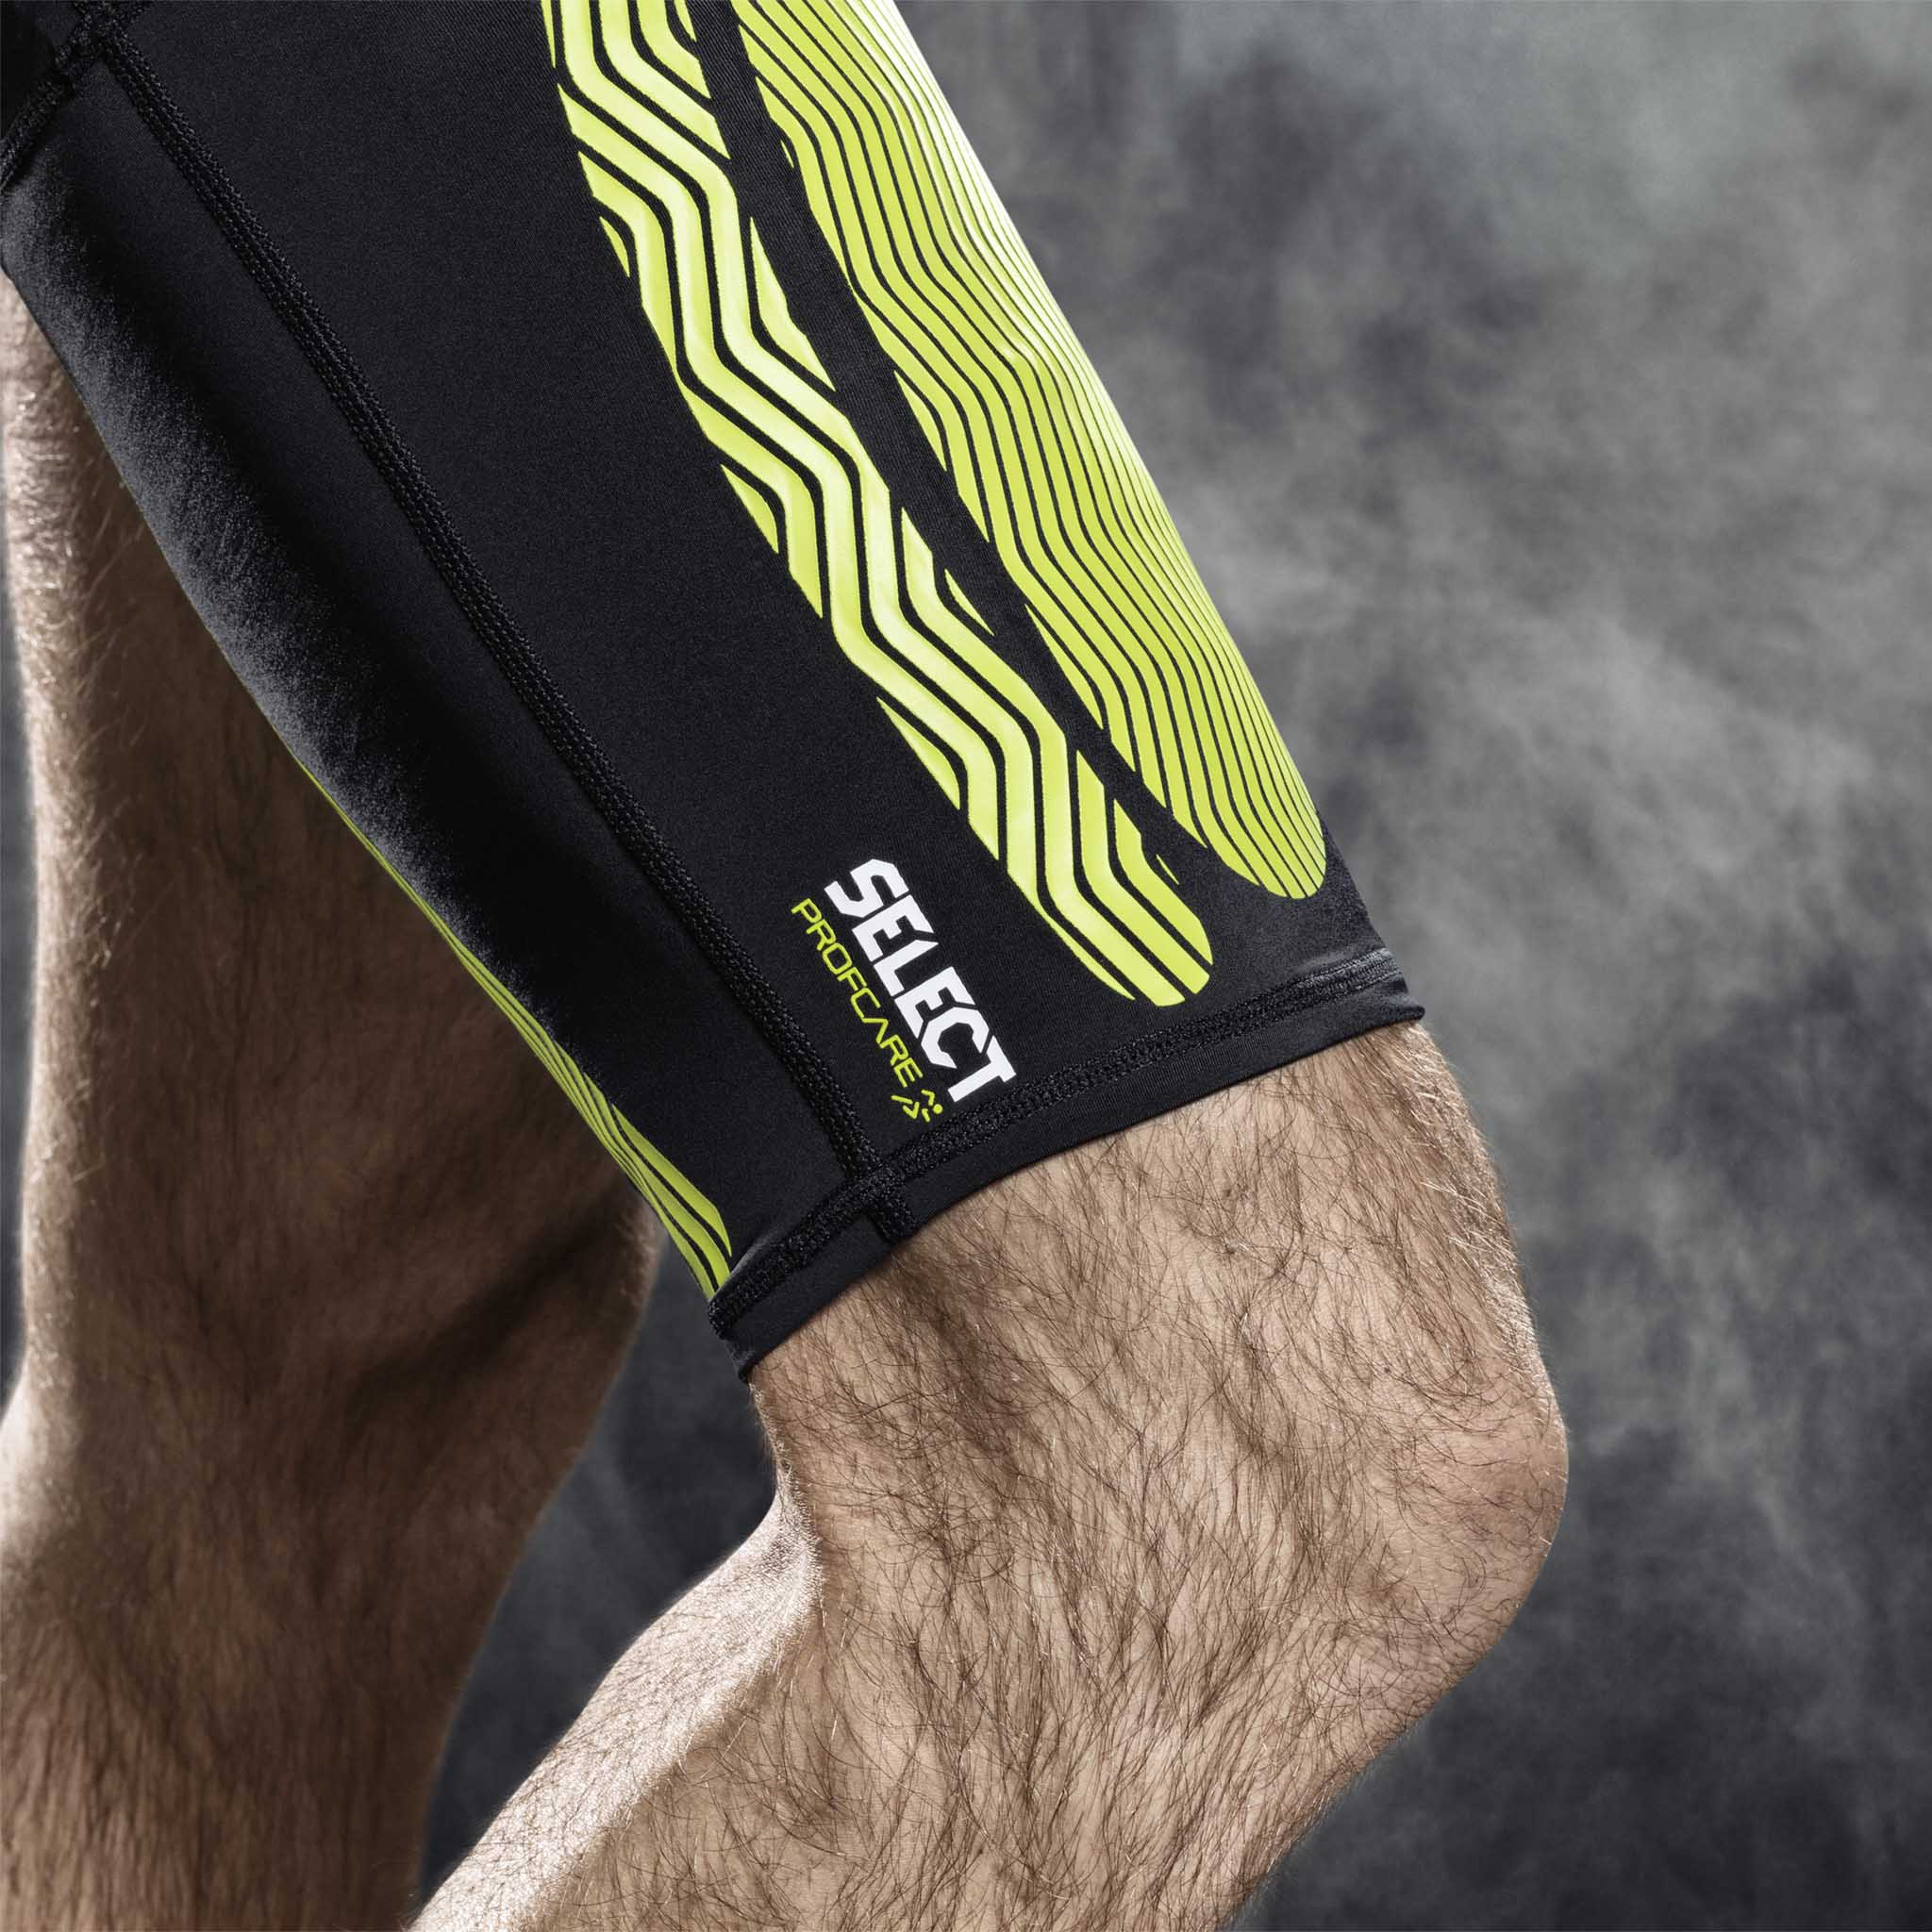 Compression arm sleeves